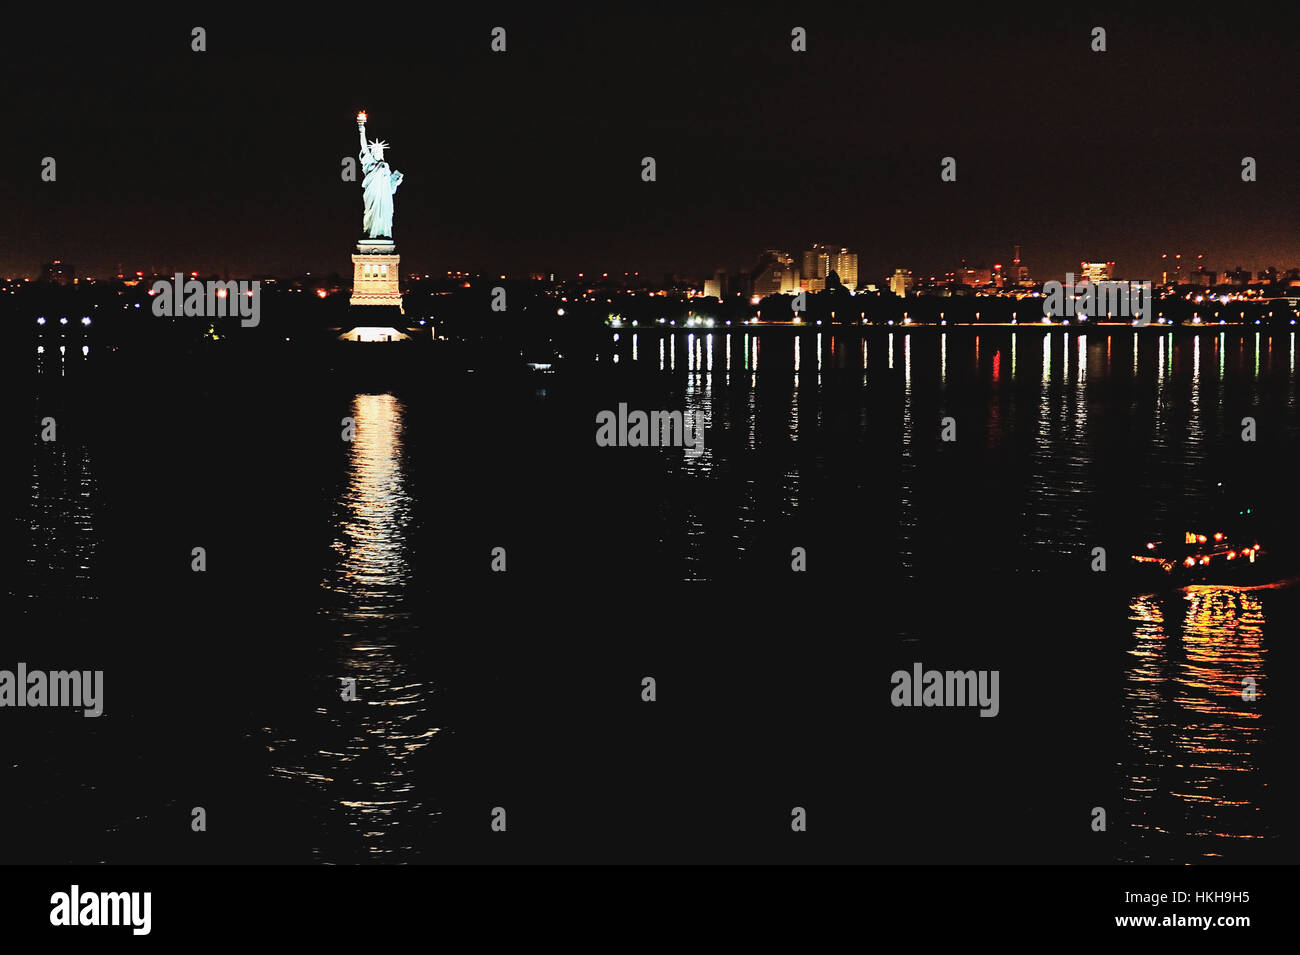 Statue of liberty at night reflect in water Stock Photo